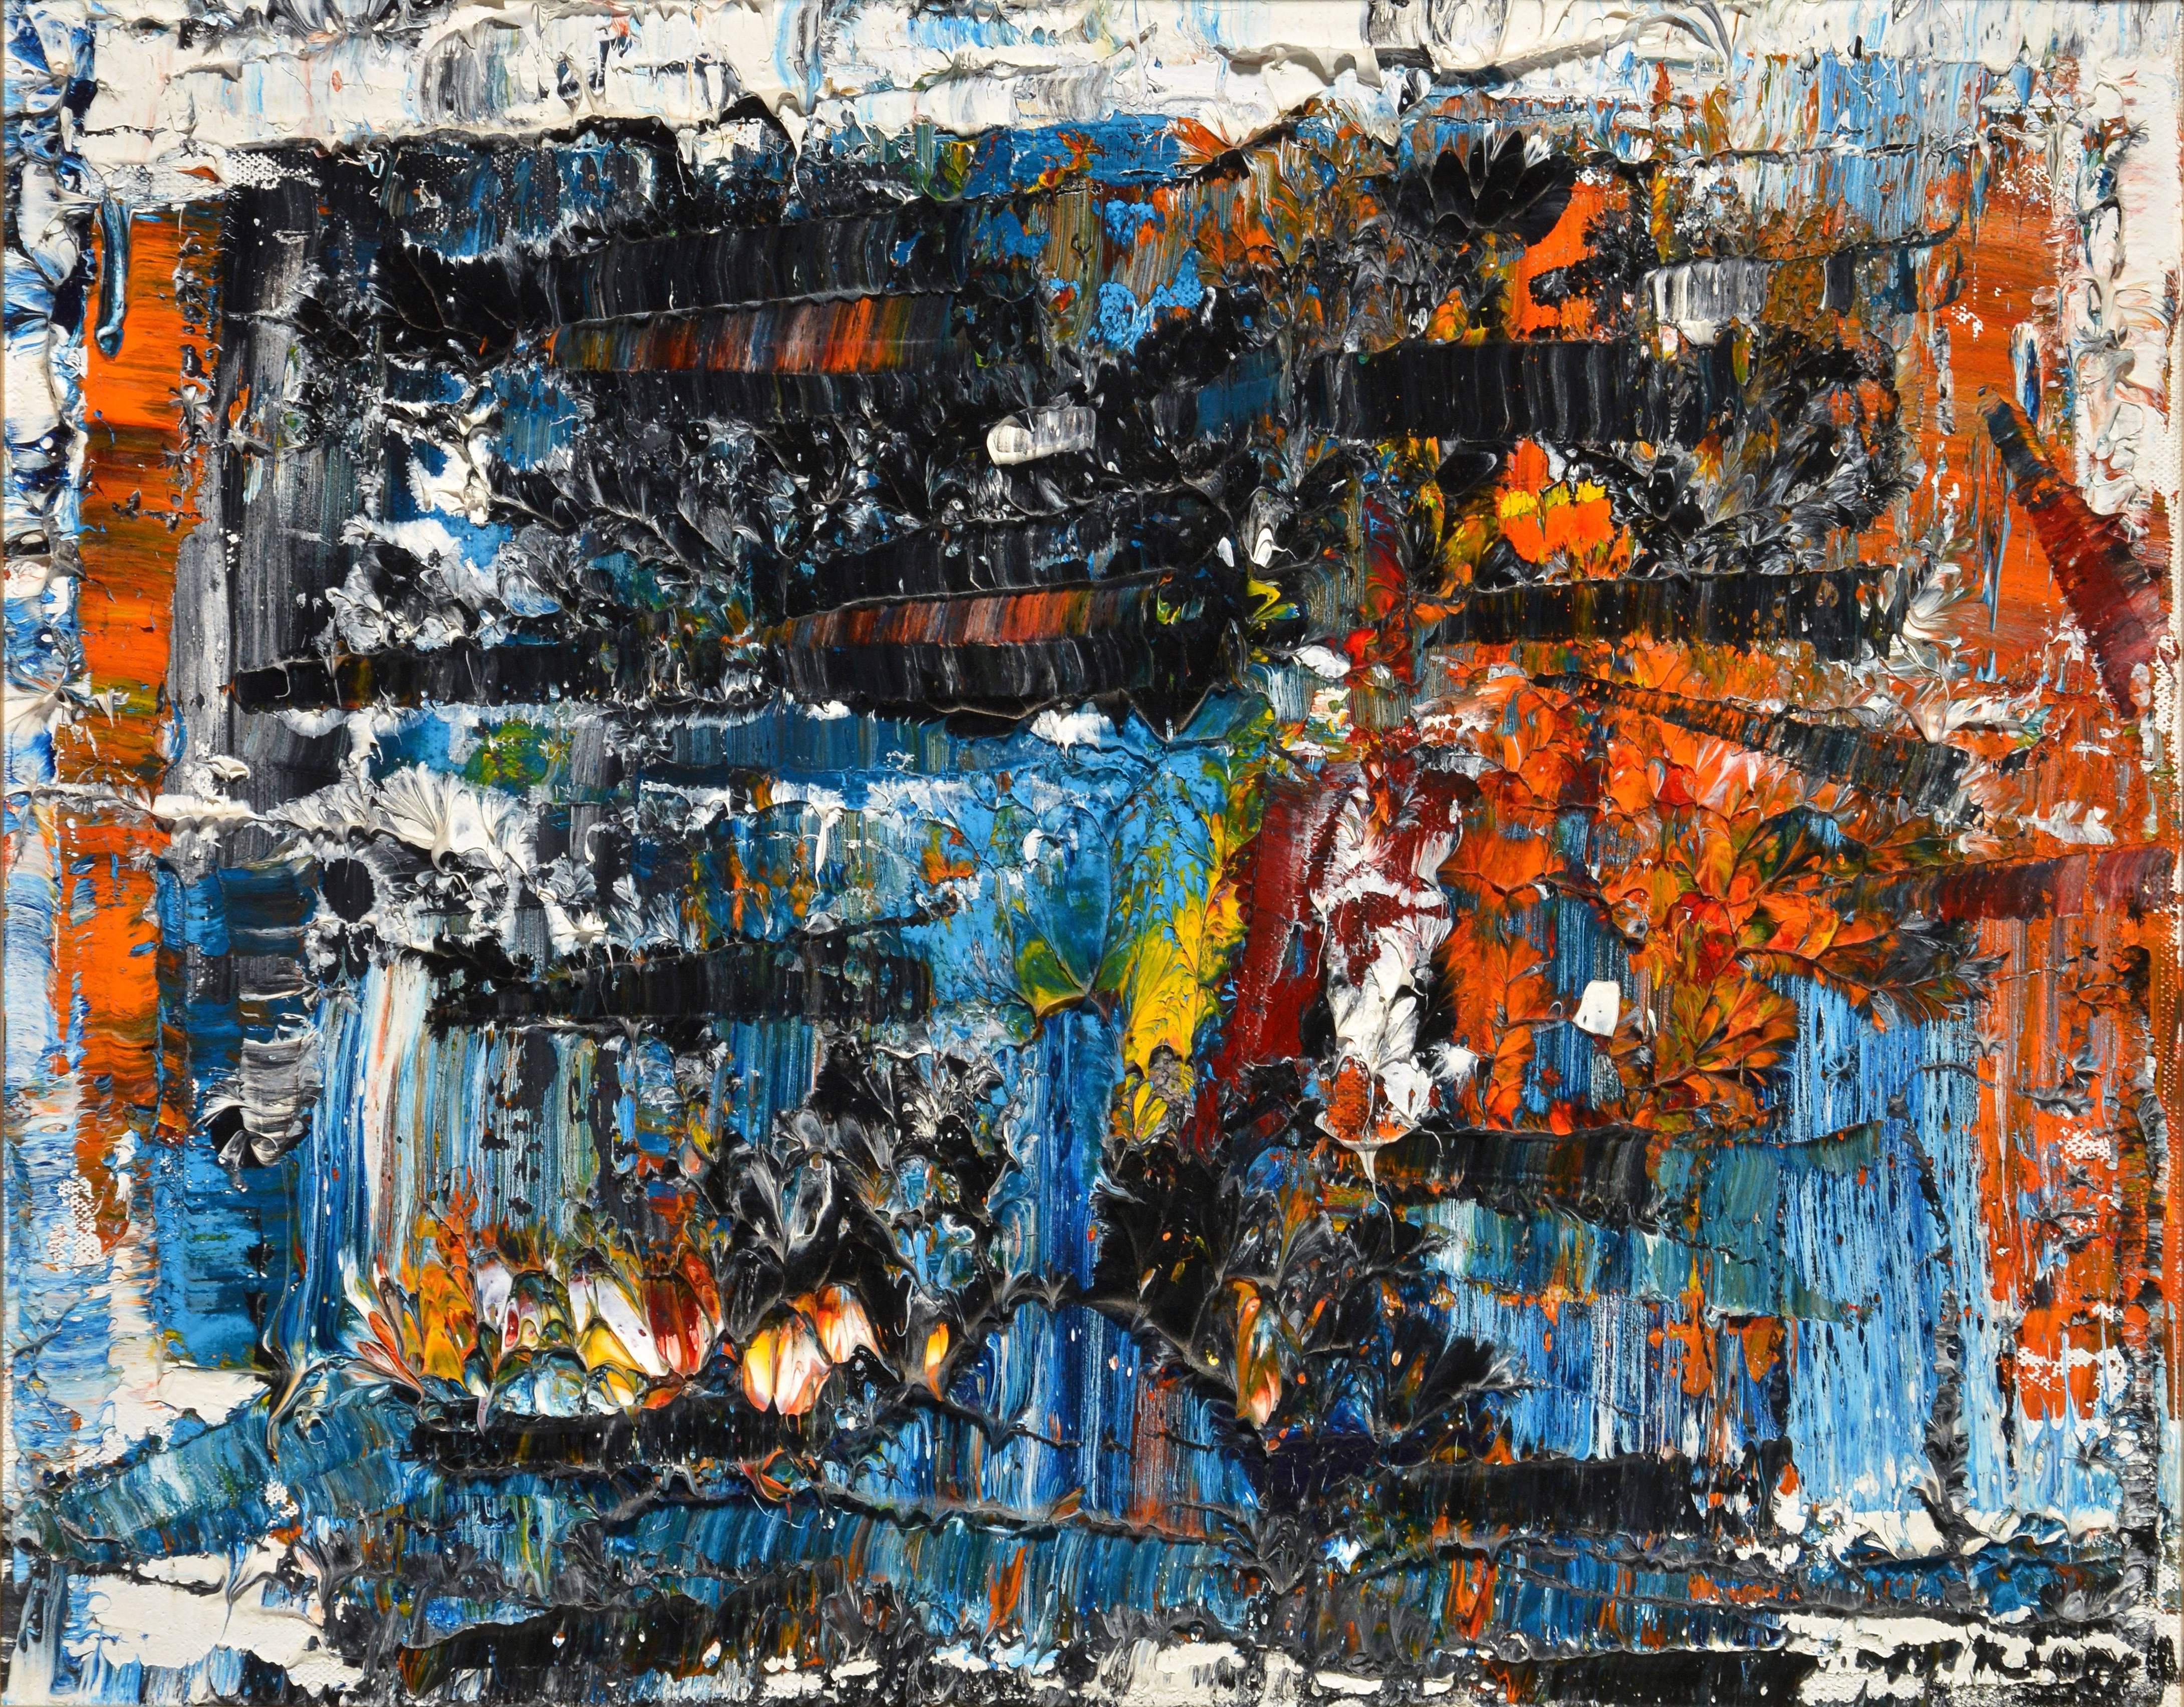 Untitled, 1978 - Painting by Jean Paul Riopelle